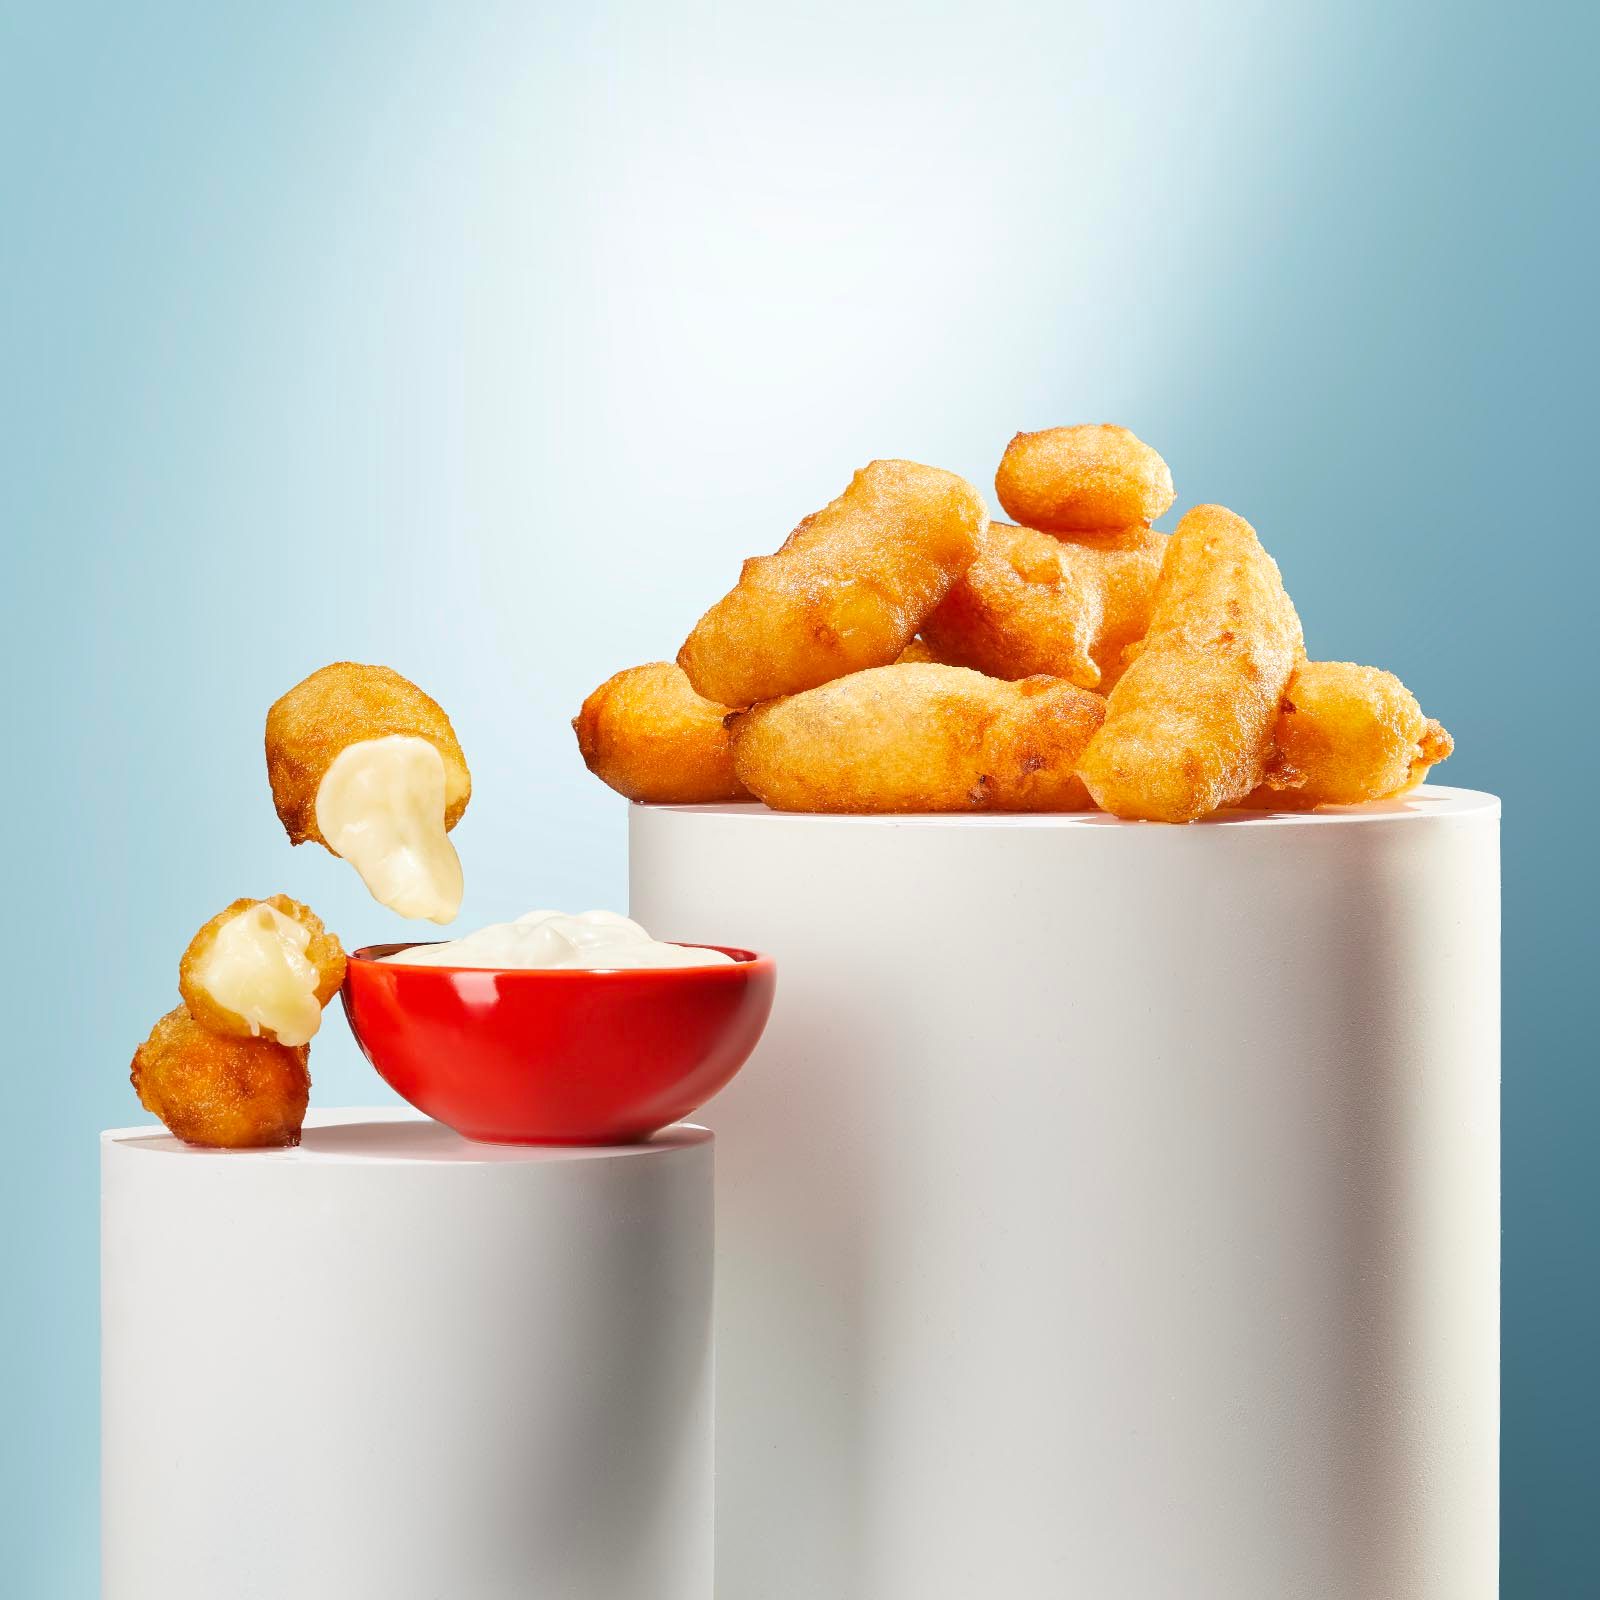 Cheese curds and dipping sauce on pedestals